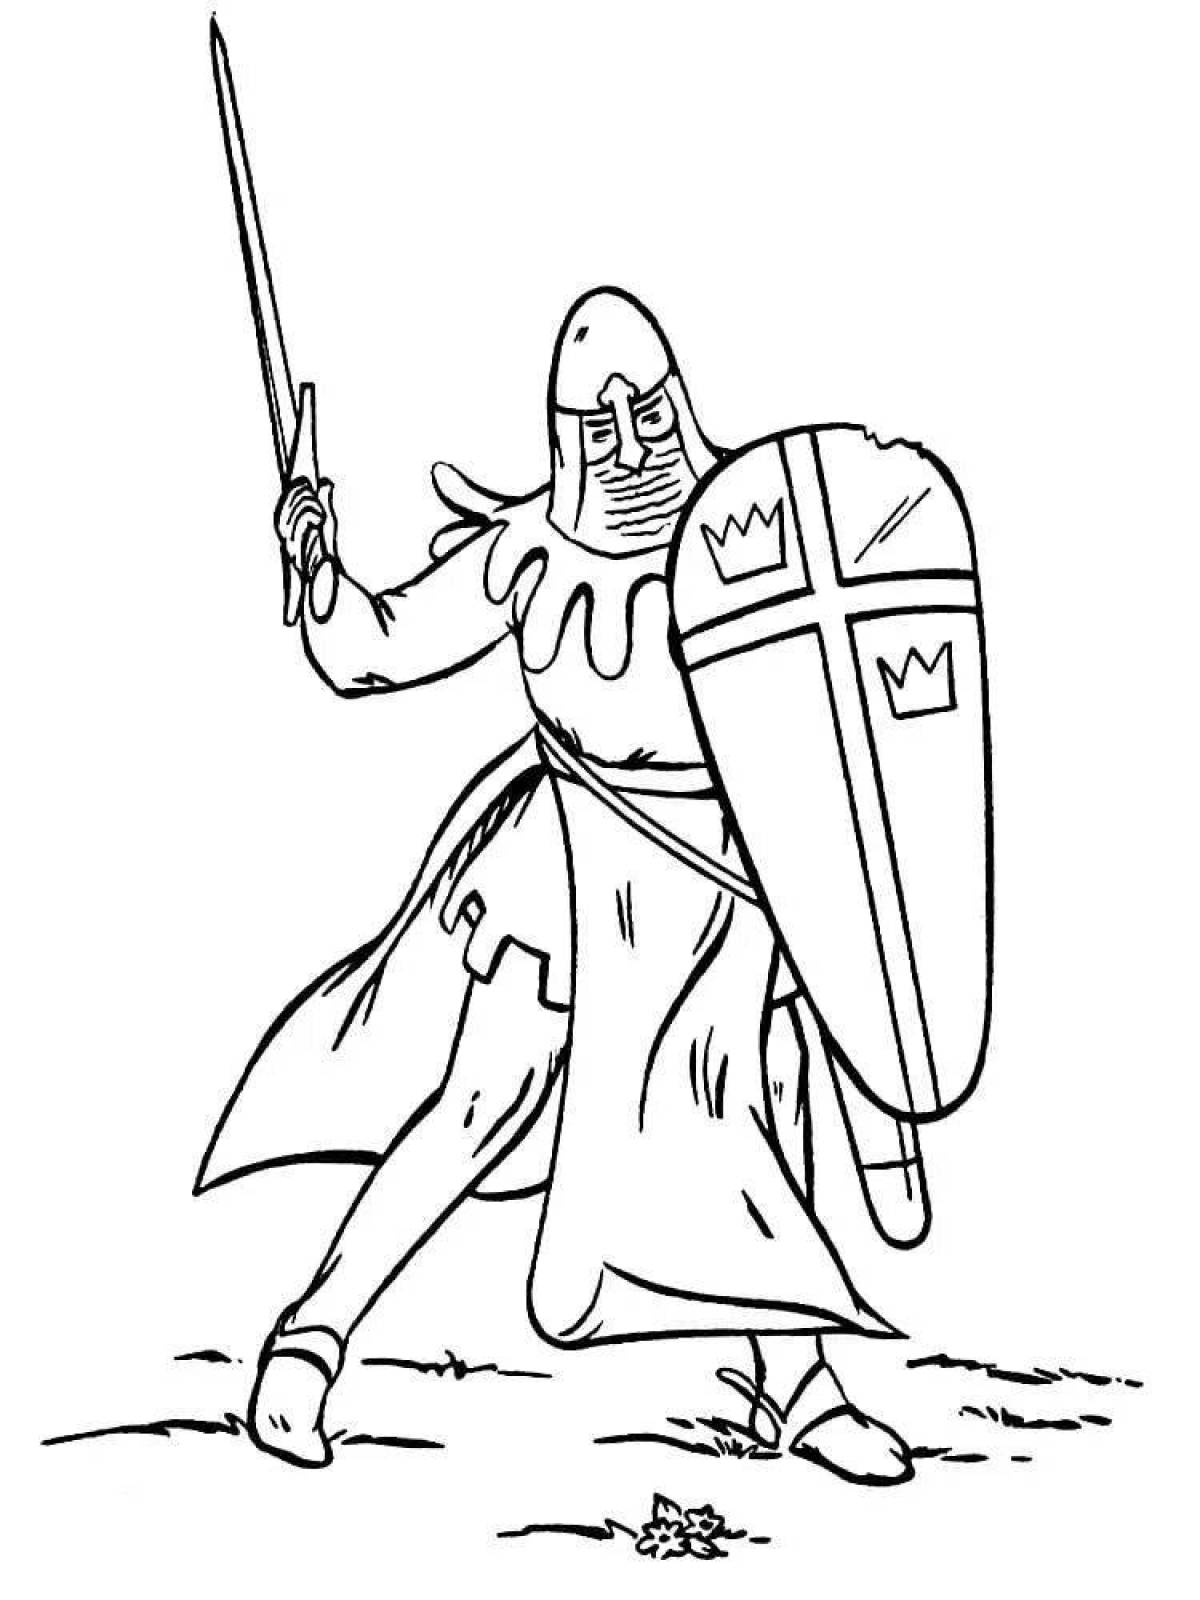 Heroic knight coloring book for kids